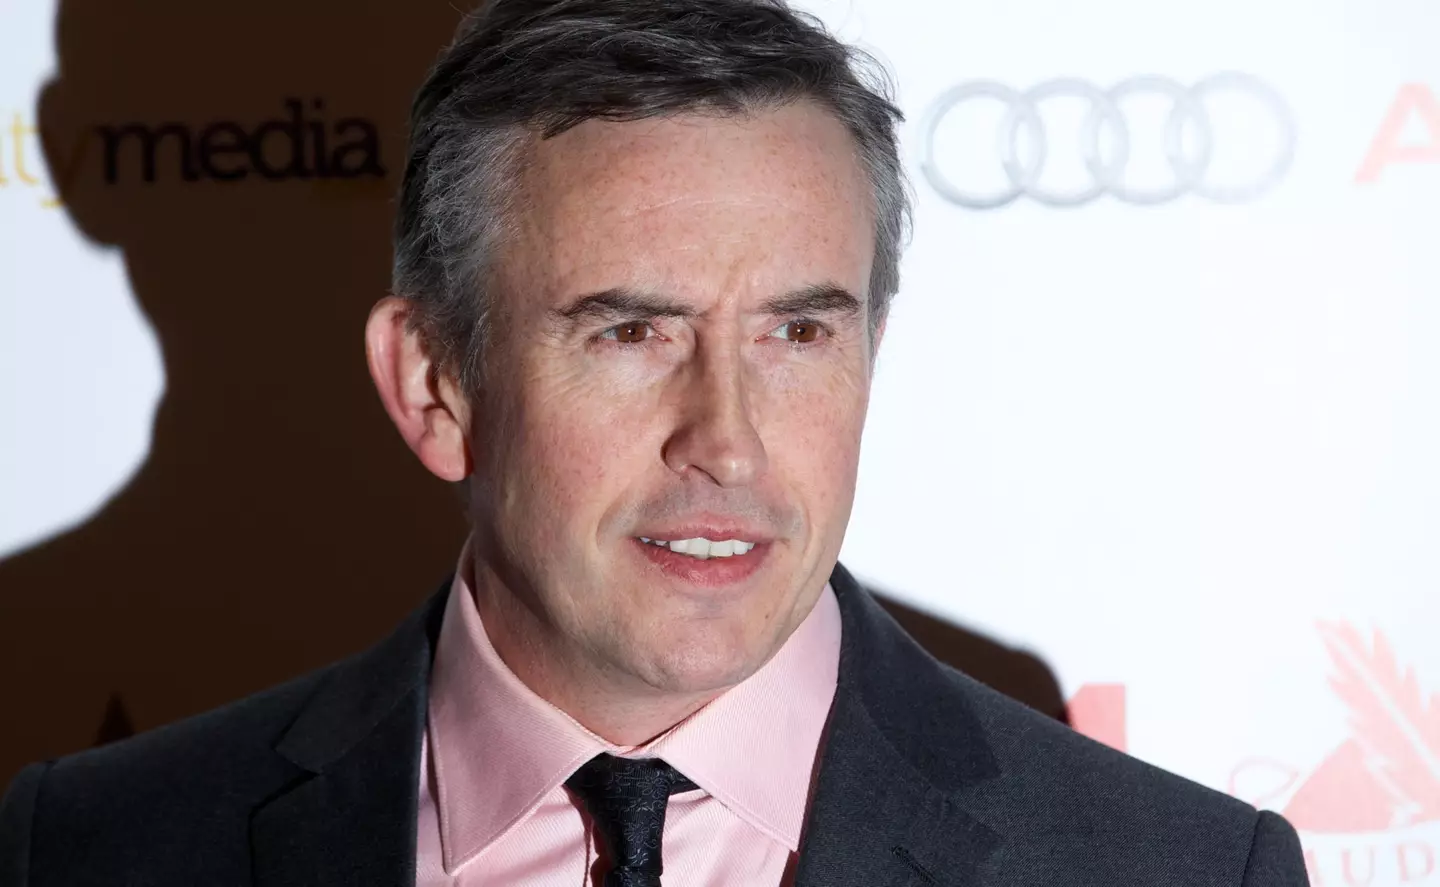 Steve Coogan wants to play the role with 'integrity'. [